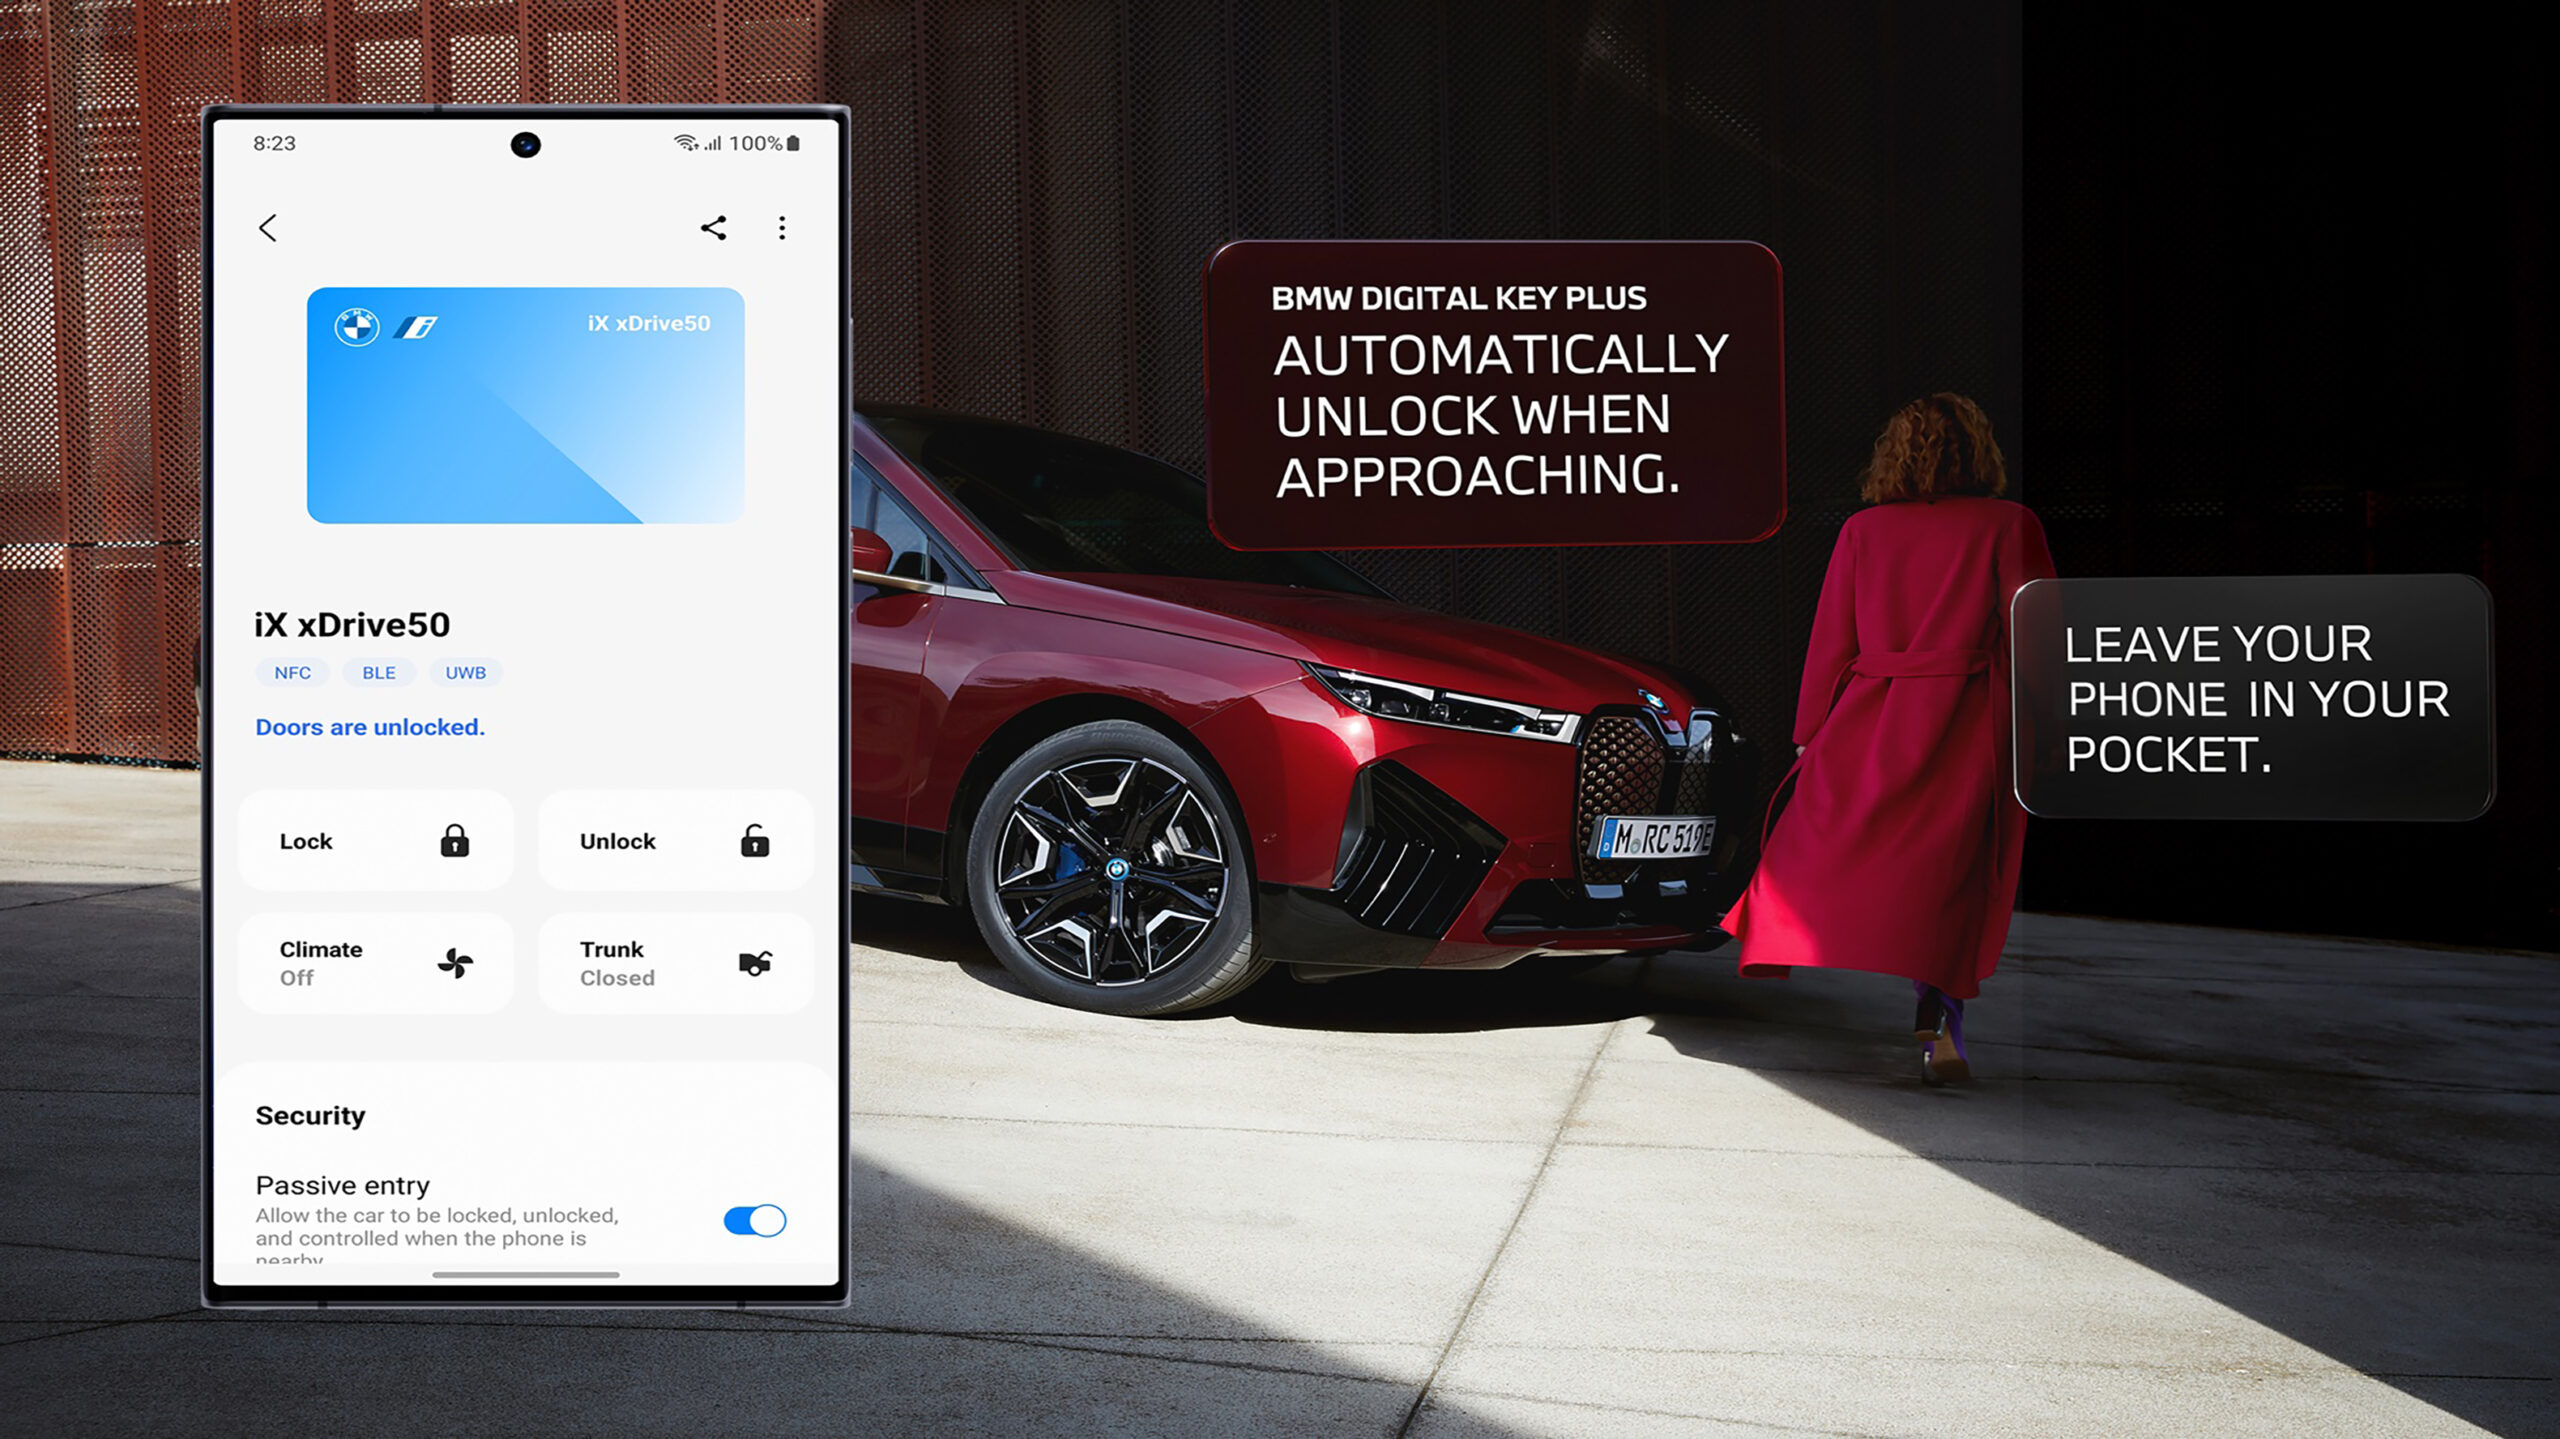 Unlock Your BMW With Your Phone: Digital Key Plus Now Available on Select Android Devices